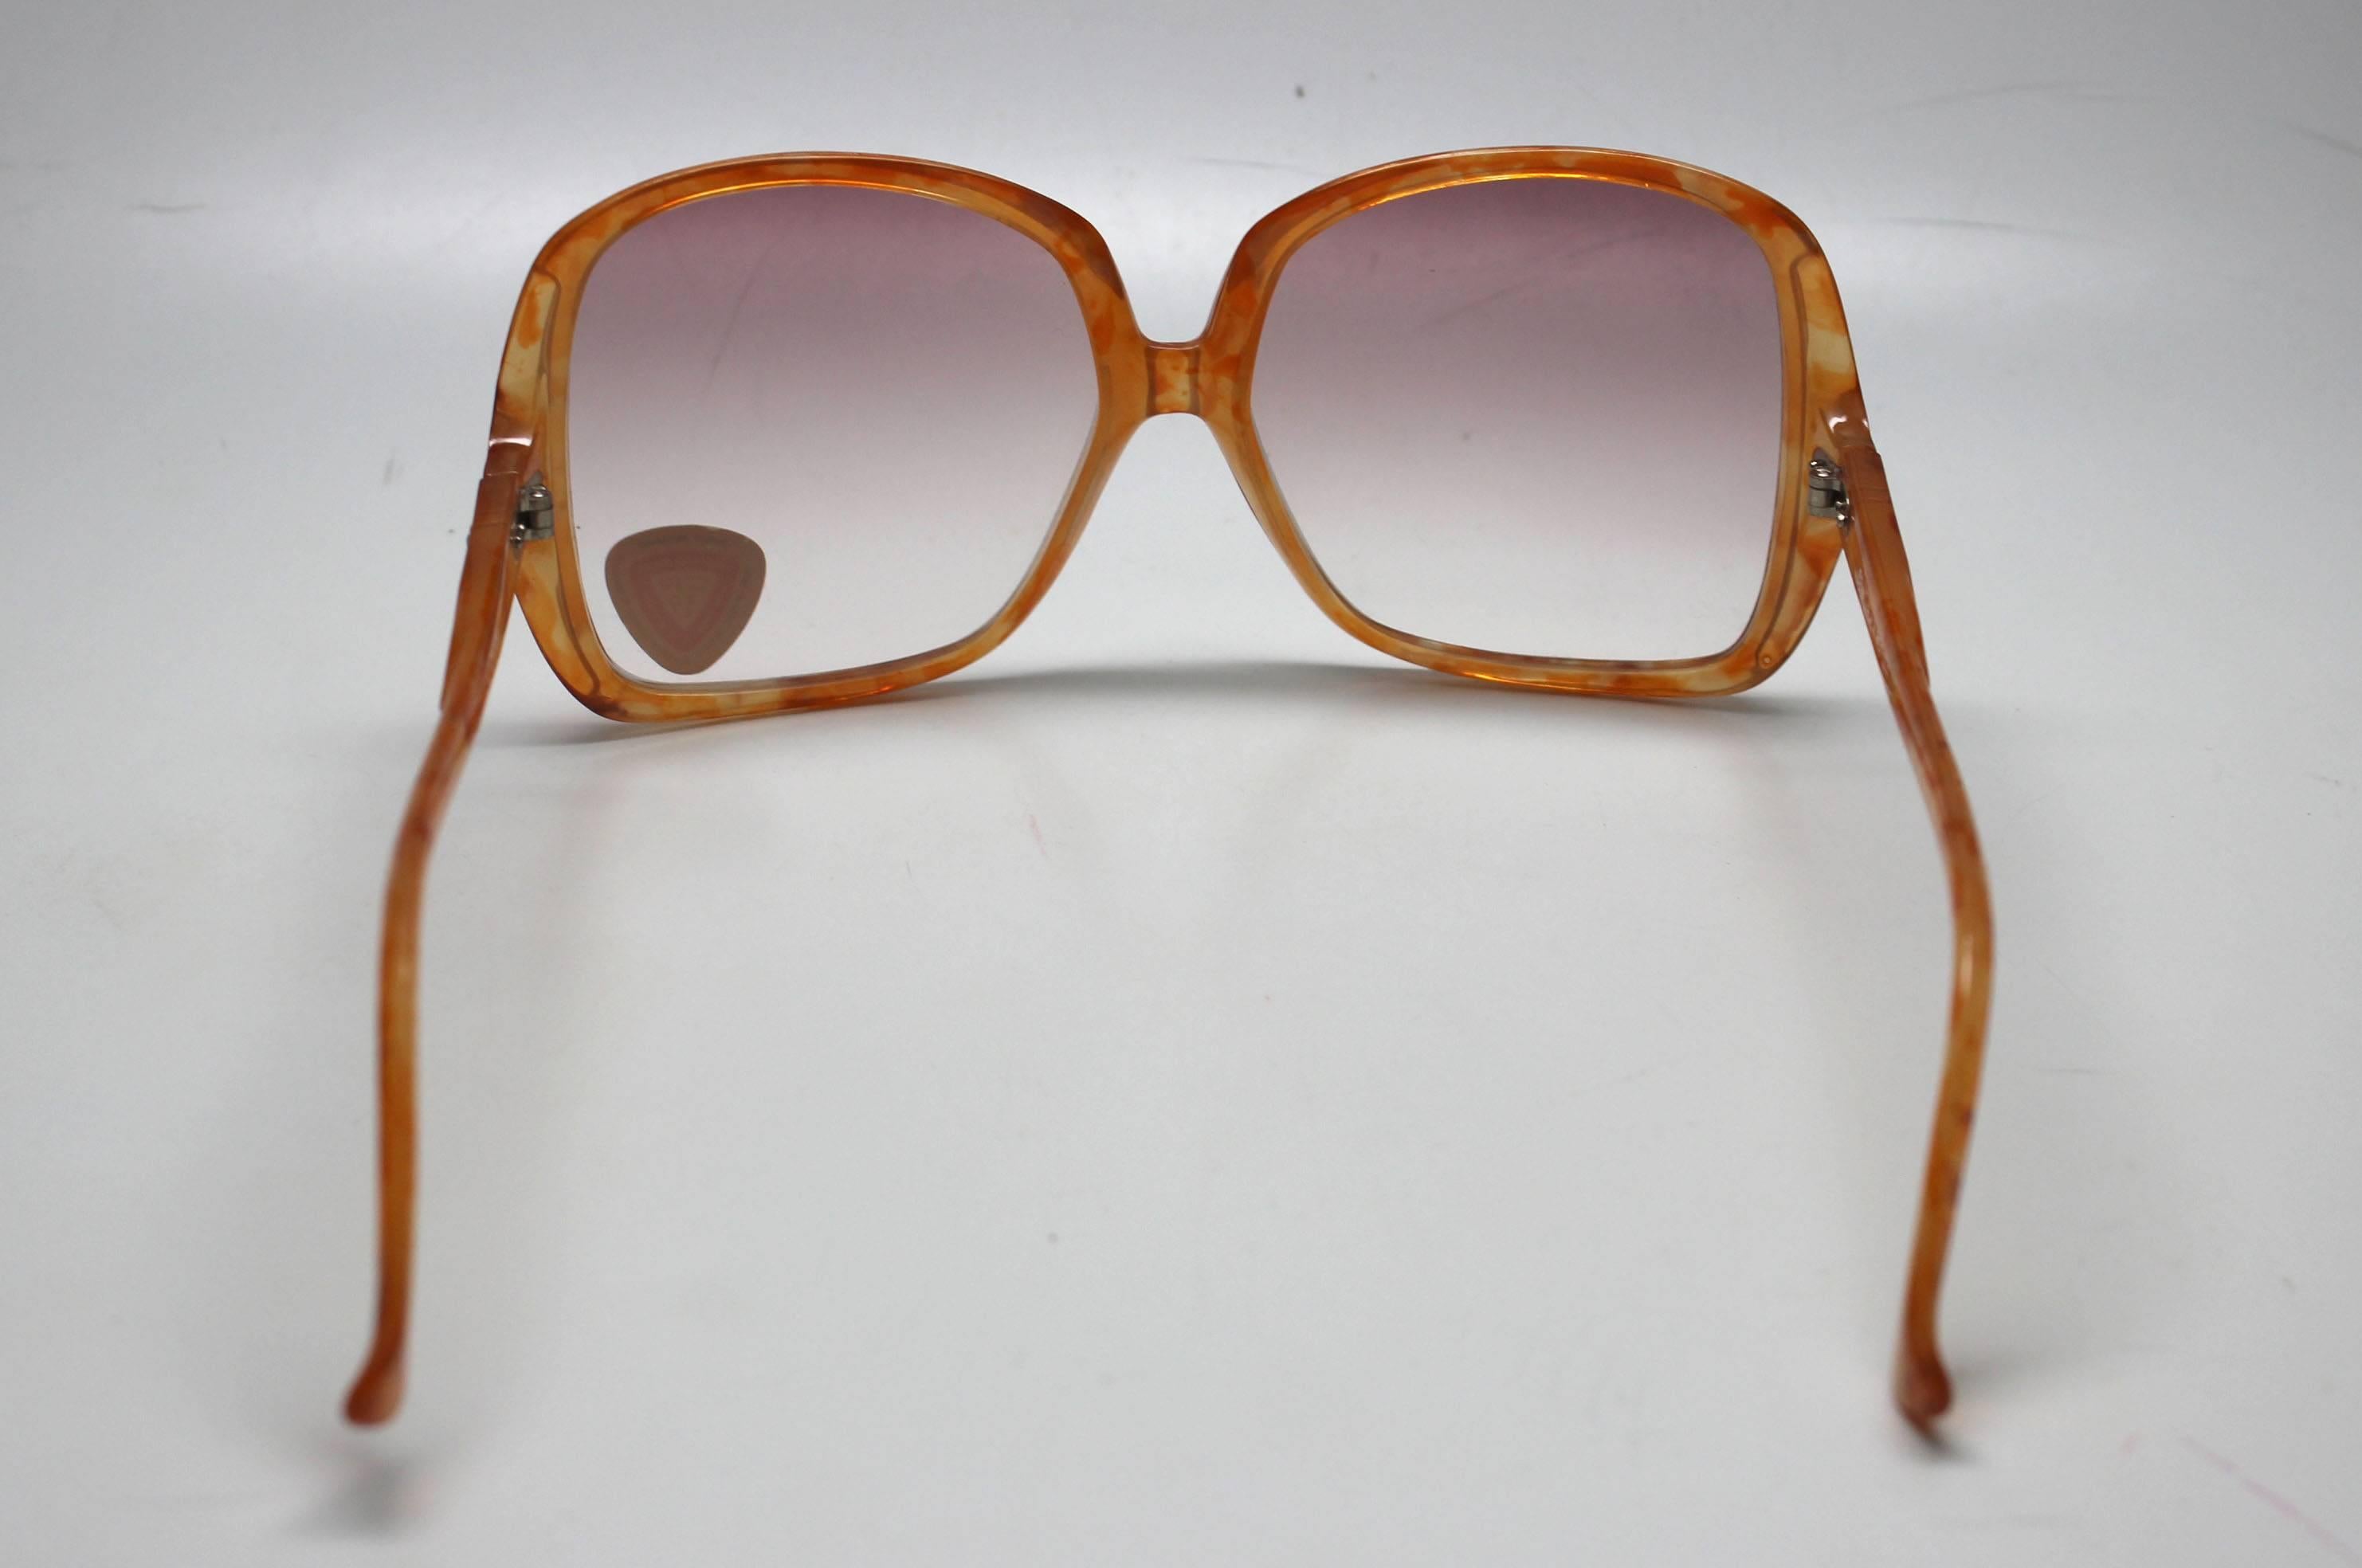 This pair of orange speckled shades comes from a collection of sunglasses that had been warehoused since the 1970's. They are good quality, the frames were made in Italy. The style is very au courant to today's trends. 